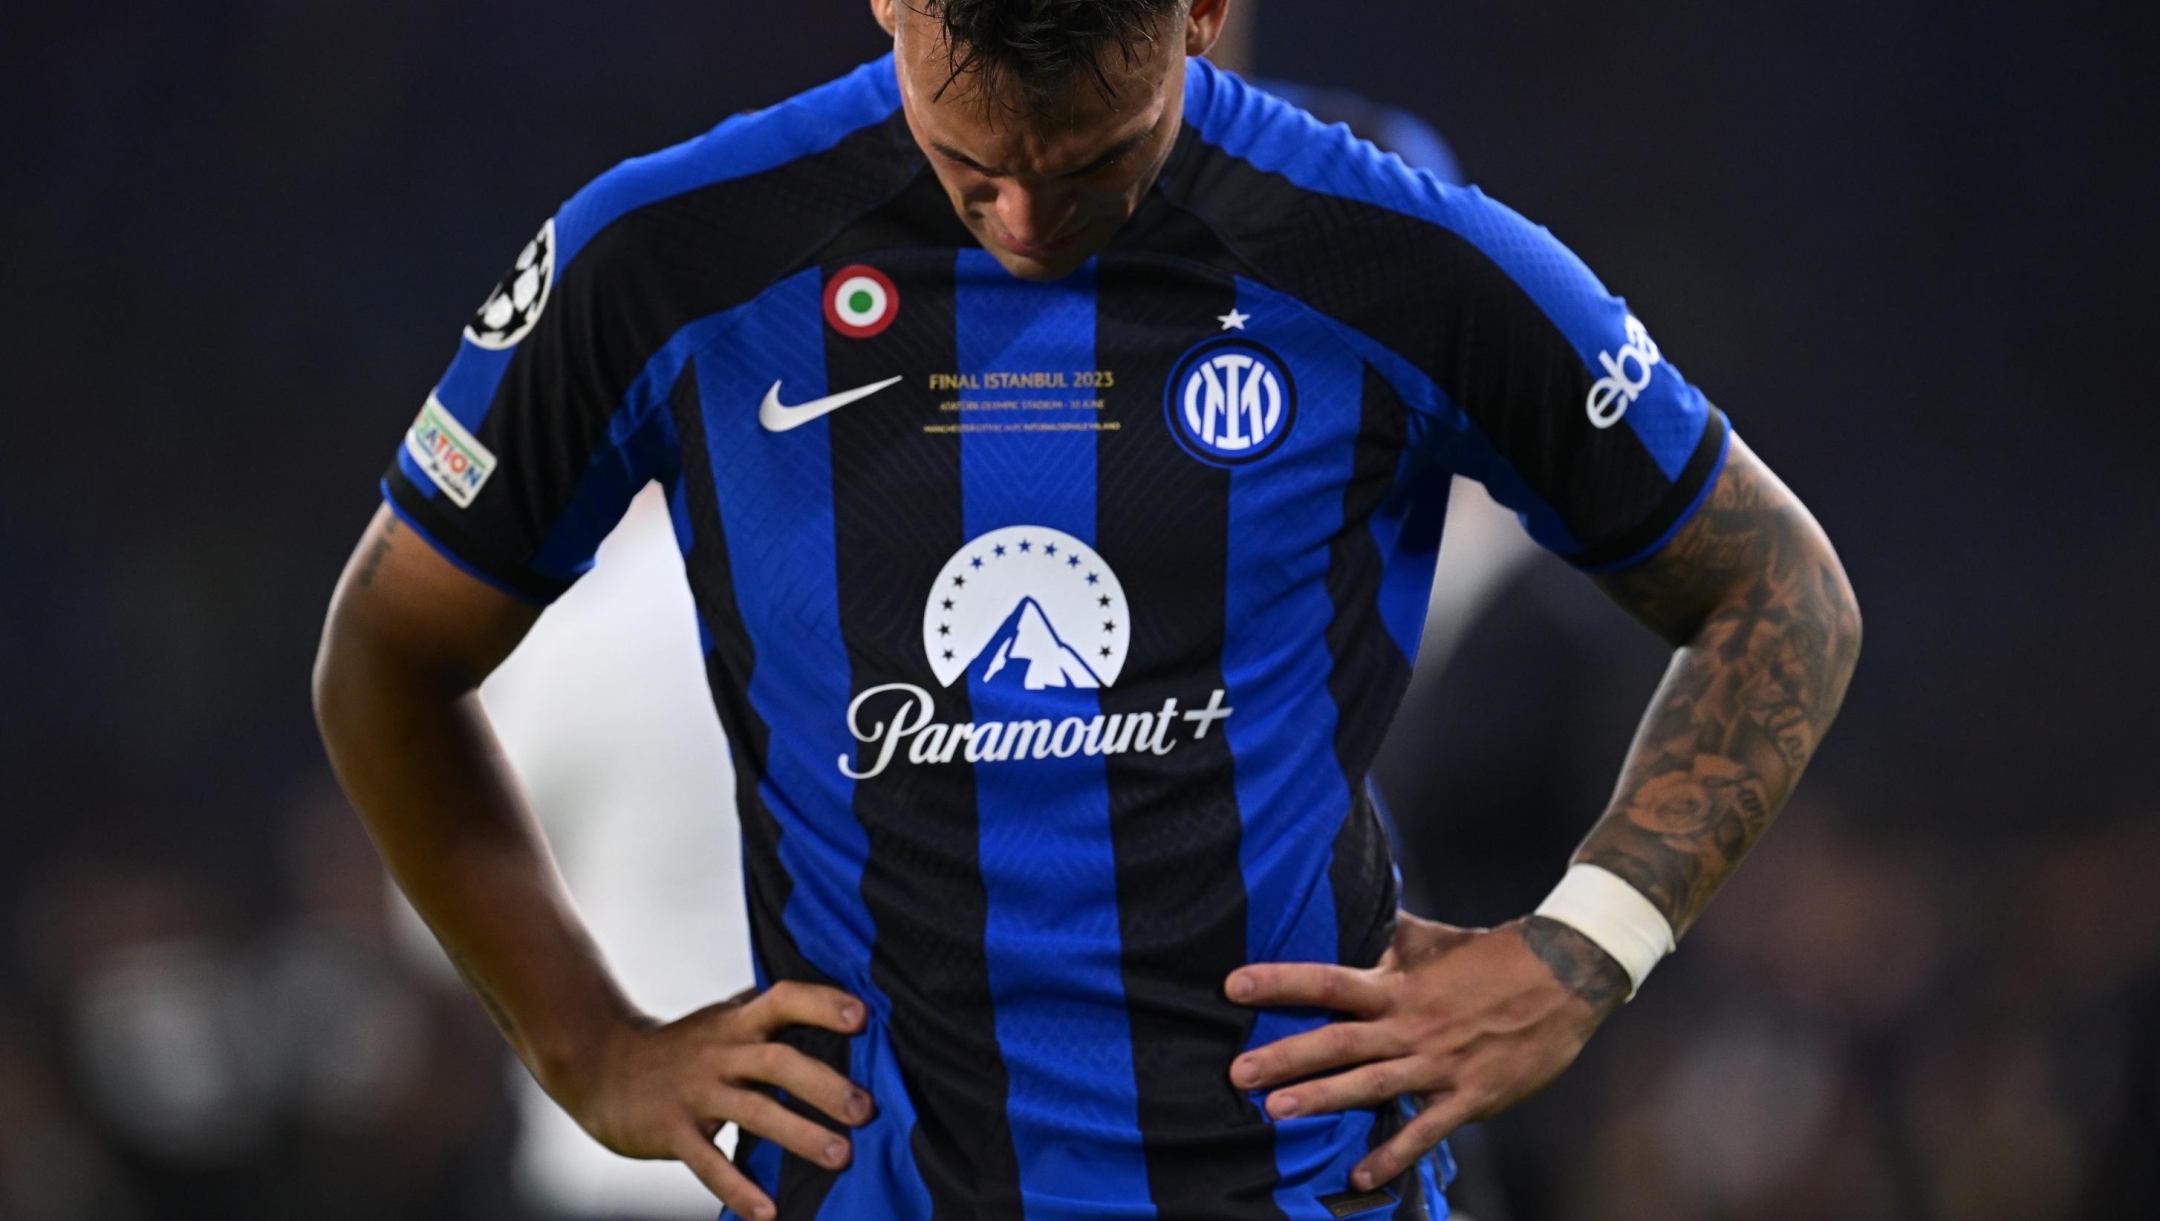 ISTANBUL, TURKEY - JUNE 10: Lautaro Martinez of FC Internazionale cries after losing the UEFA Champions League 2022/23 final match between FC Internazionale and Manchester City FC at Atatuerk Olympic Stadium on June 10, 2023 in Istanbul, Turkey. (Photo by Mattia Ozbot - Inter/Inter via Getty Images)